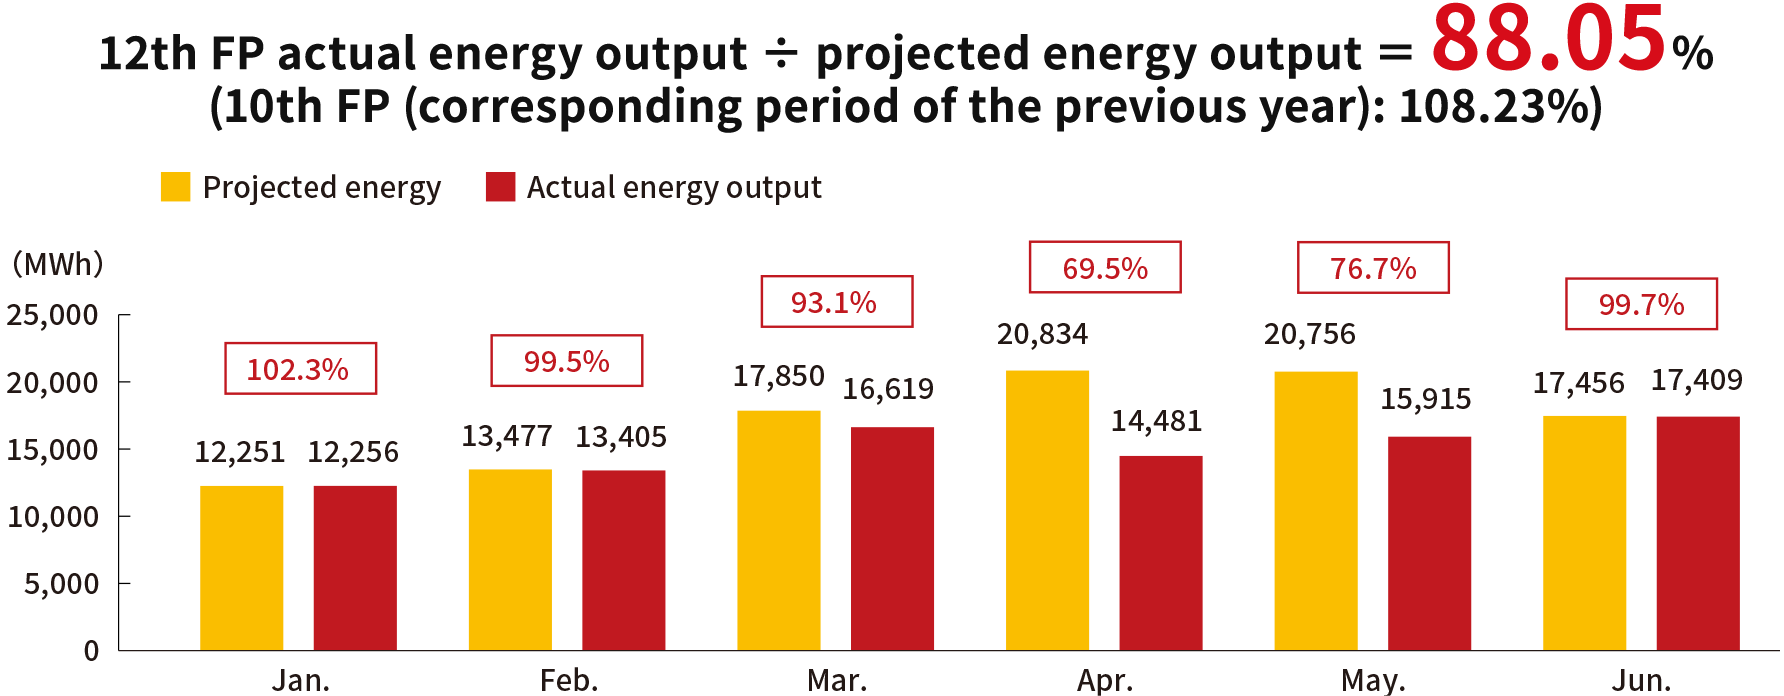 12th FP actual energy output ÷ projected energy output = 88.05% (10th FP (corresponding period of the previous year): 108.23%)